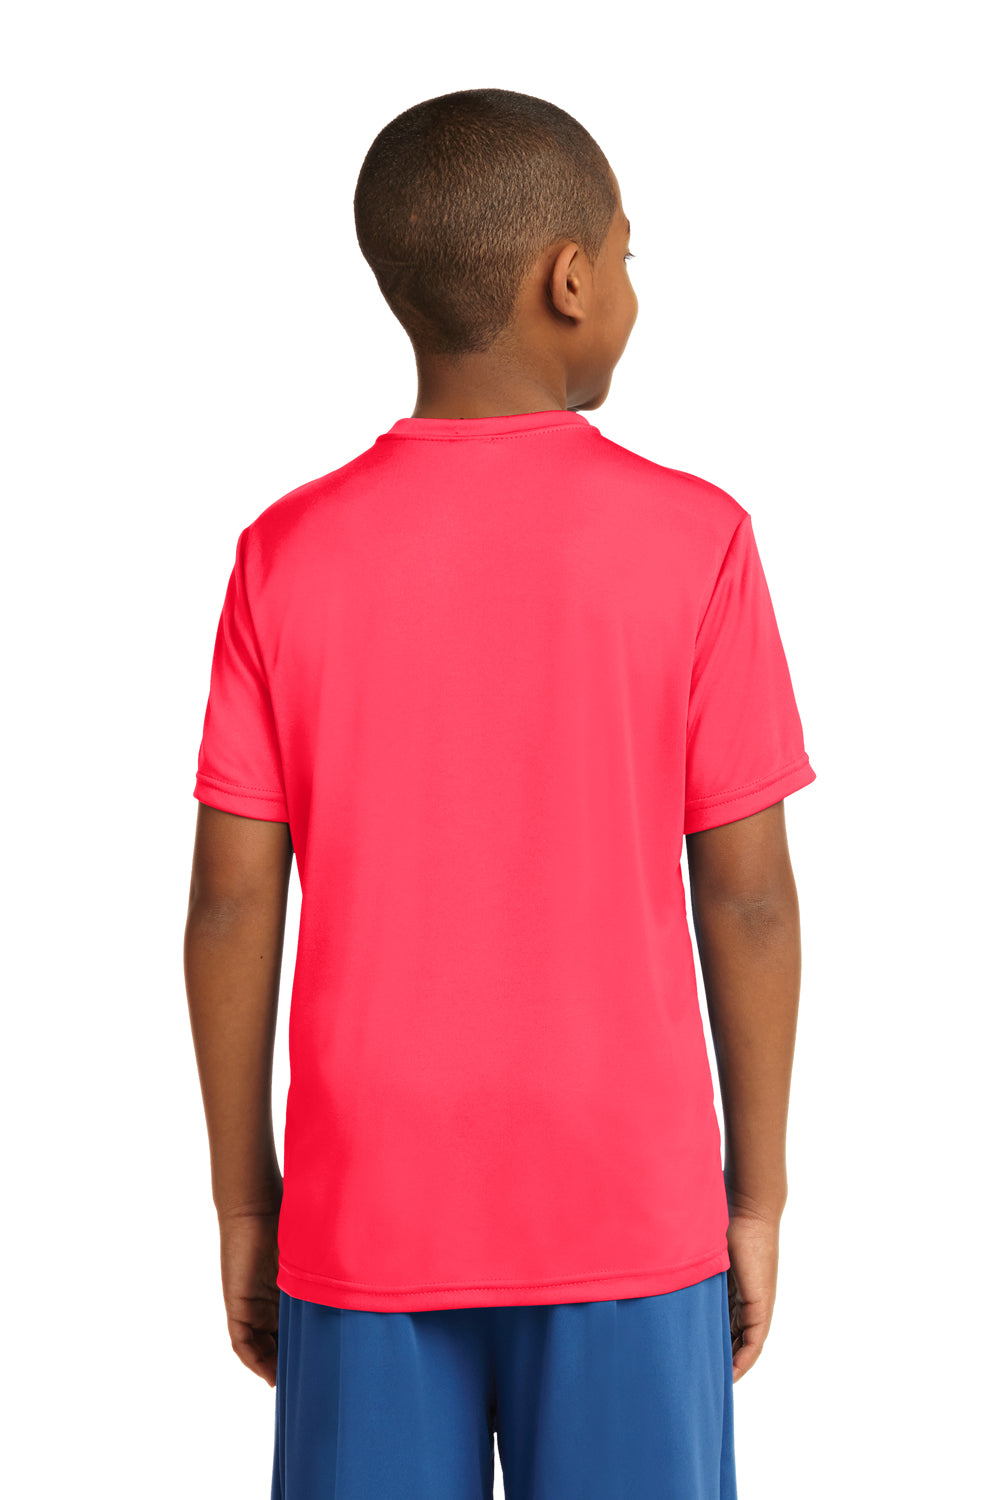 Sport-Tek YST350 Youth Competitor Moisture Wicking Short Sleeve Crewneck T-Shirt Hot Coral Pink Back